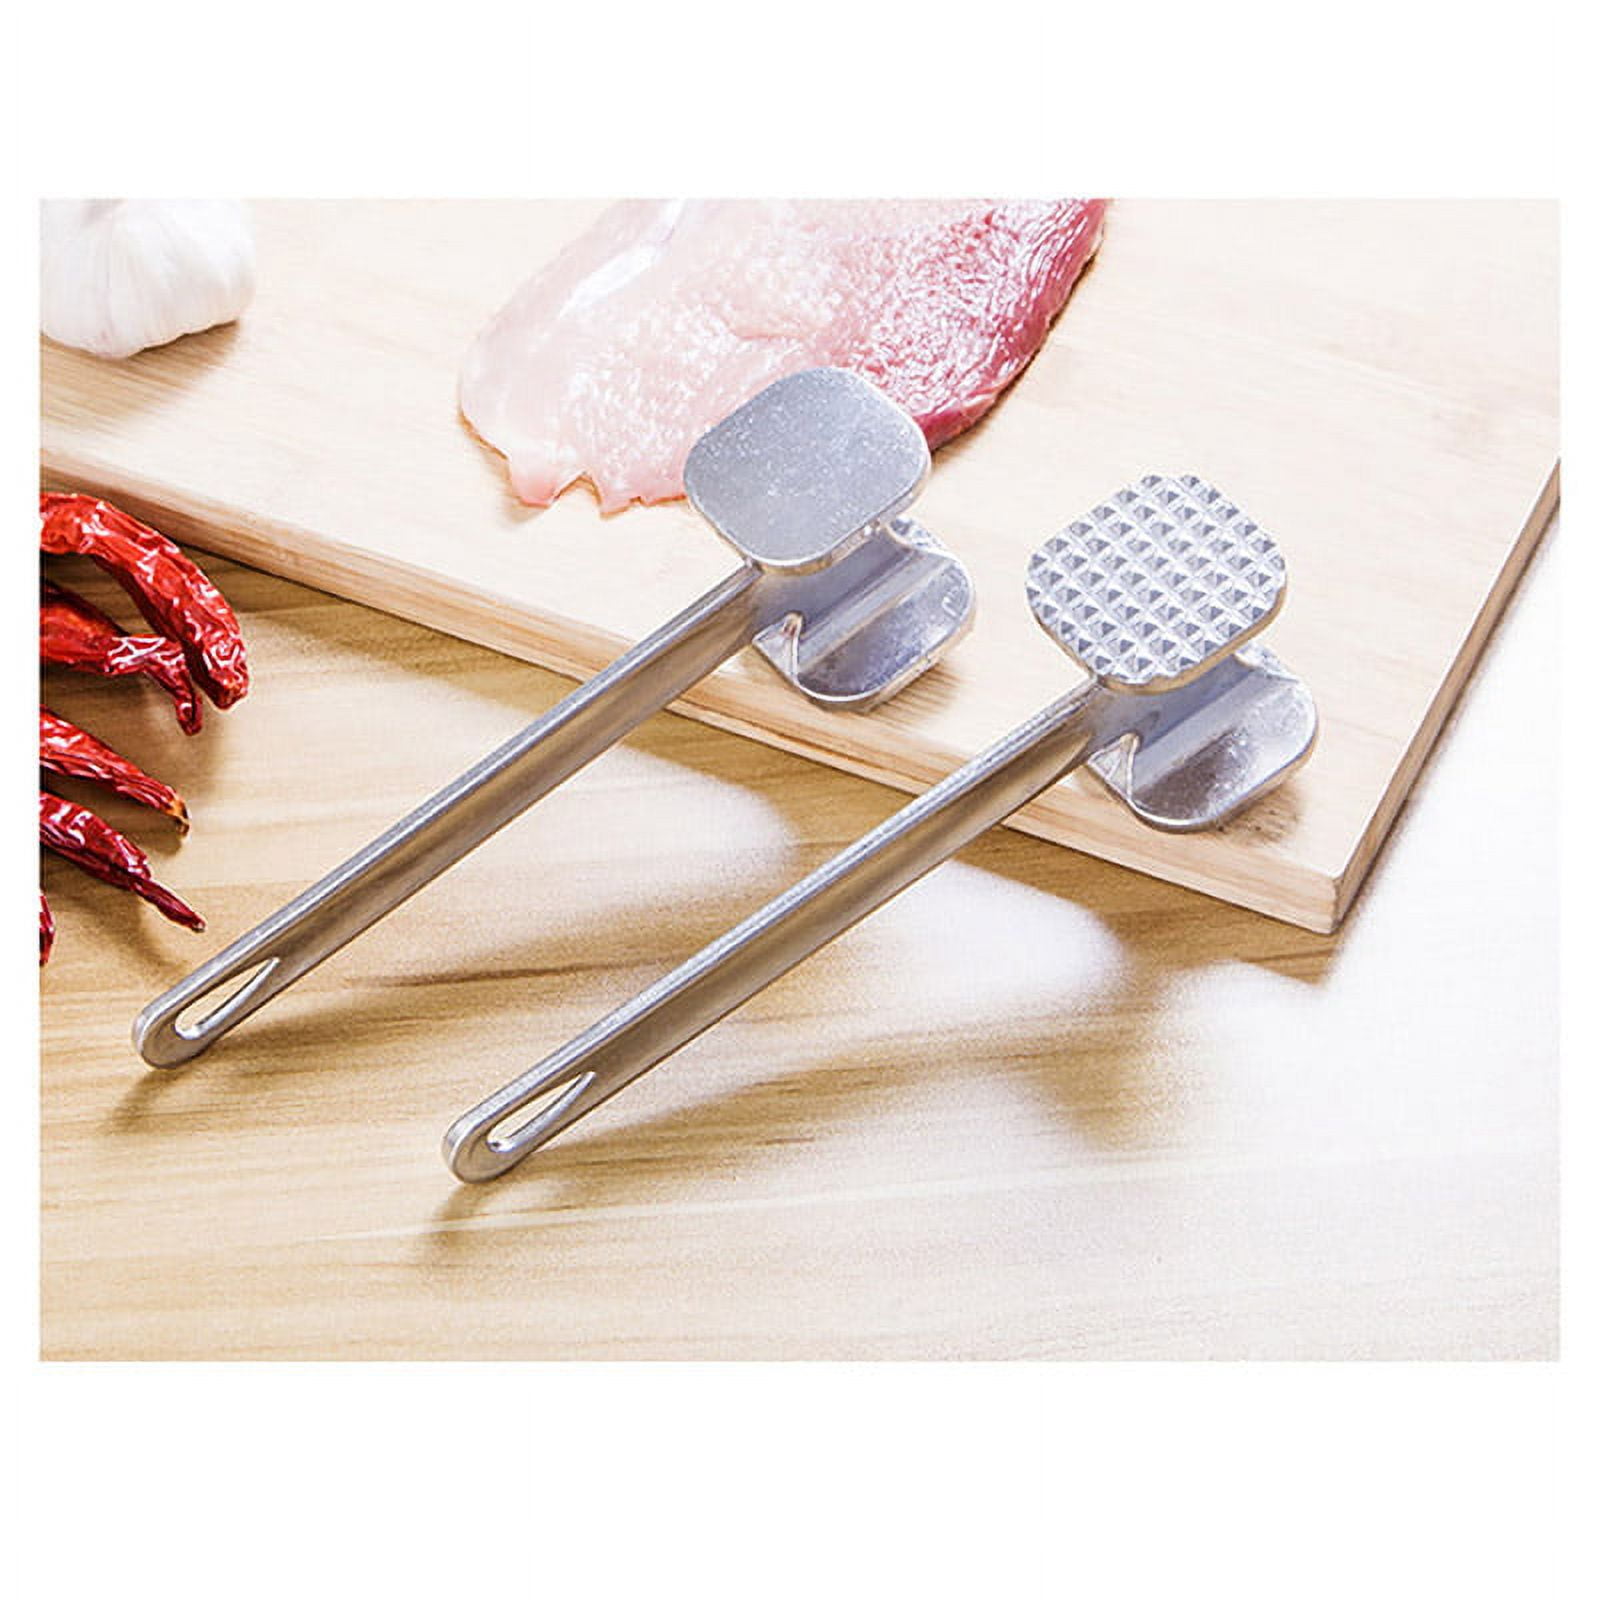 XEOVHV Meat Tenderizer Stainless Steel - Premium Classic Meat Hammer -  Kitchen Meat Mallet - Chicken, Conch, Veal Cutlets Meat Tenderizer Tool -  Meat